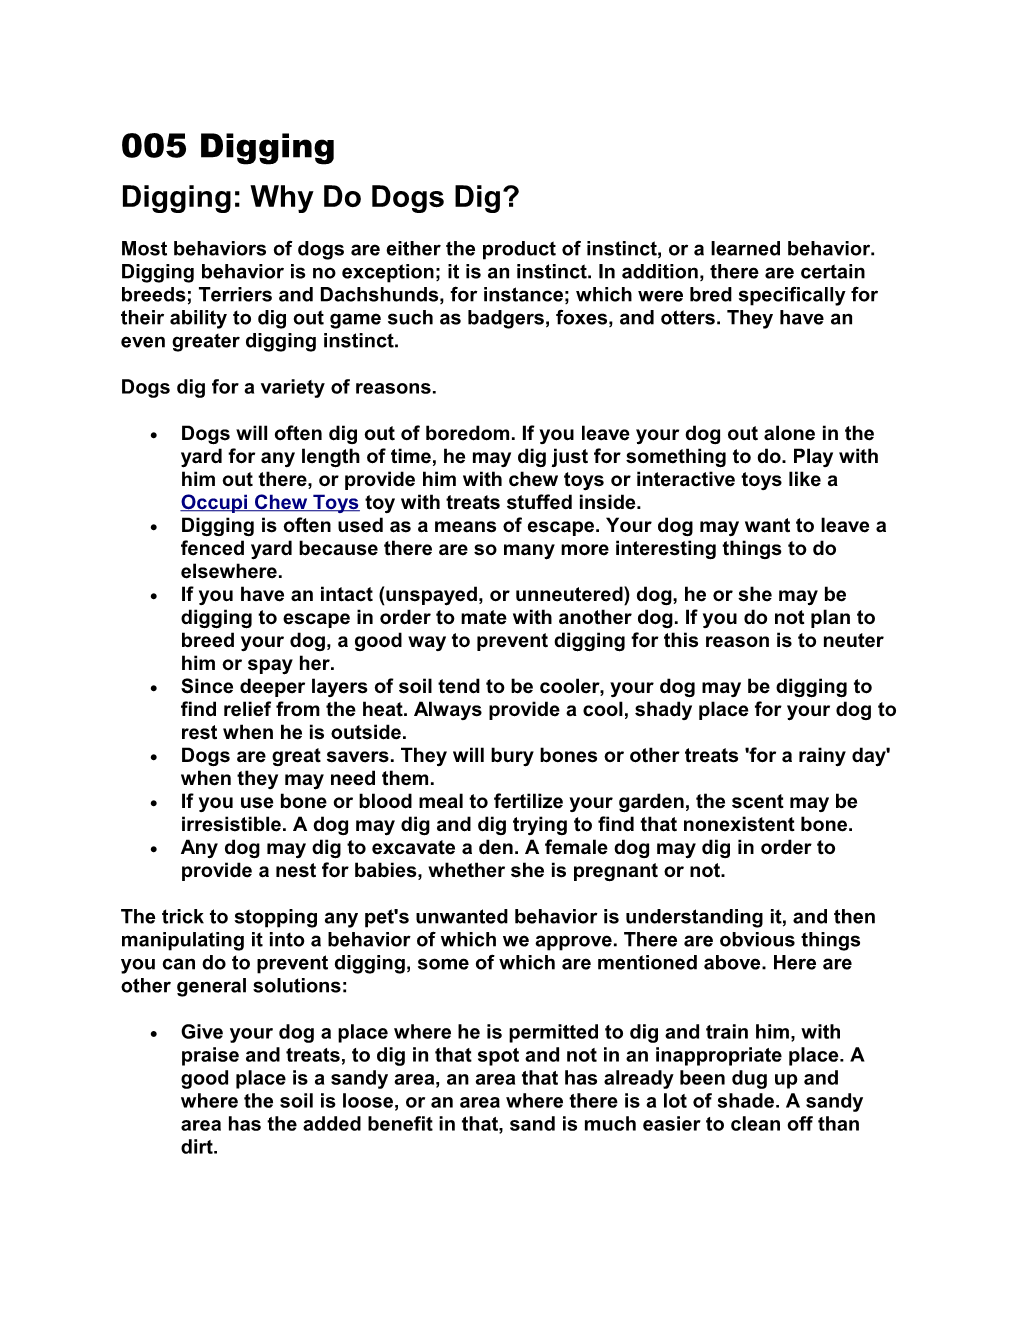 Digging: Why Do Dogs Dig?